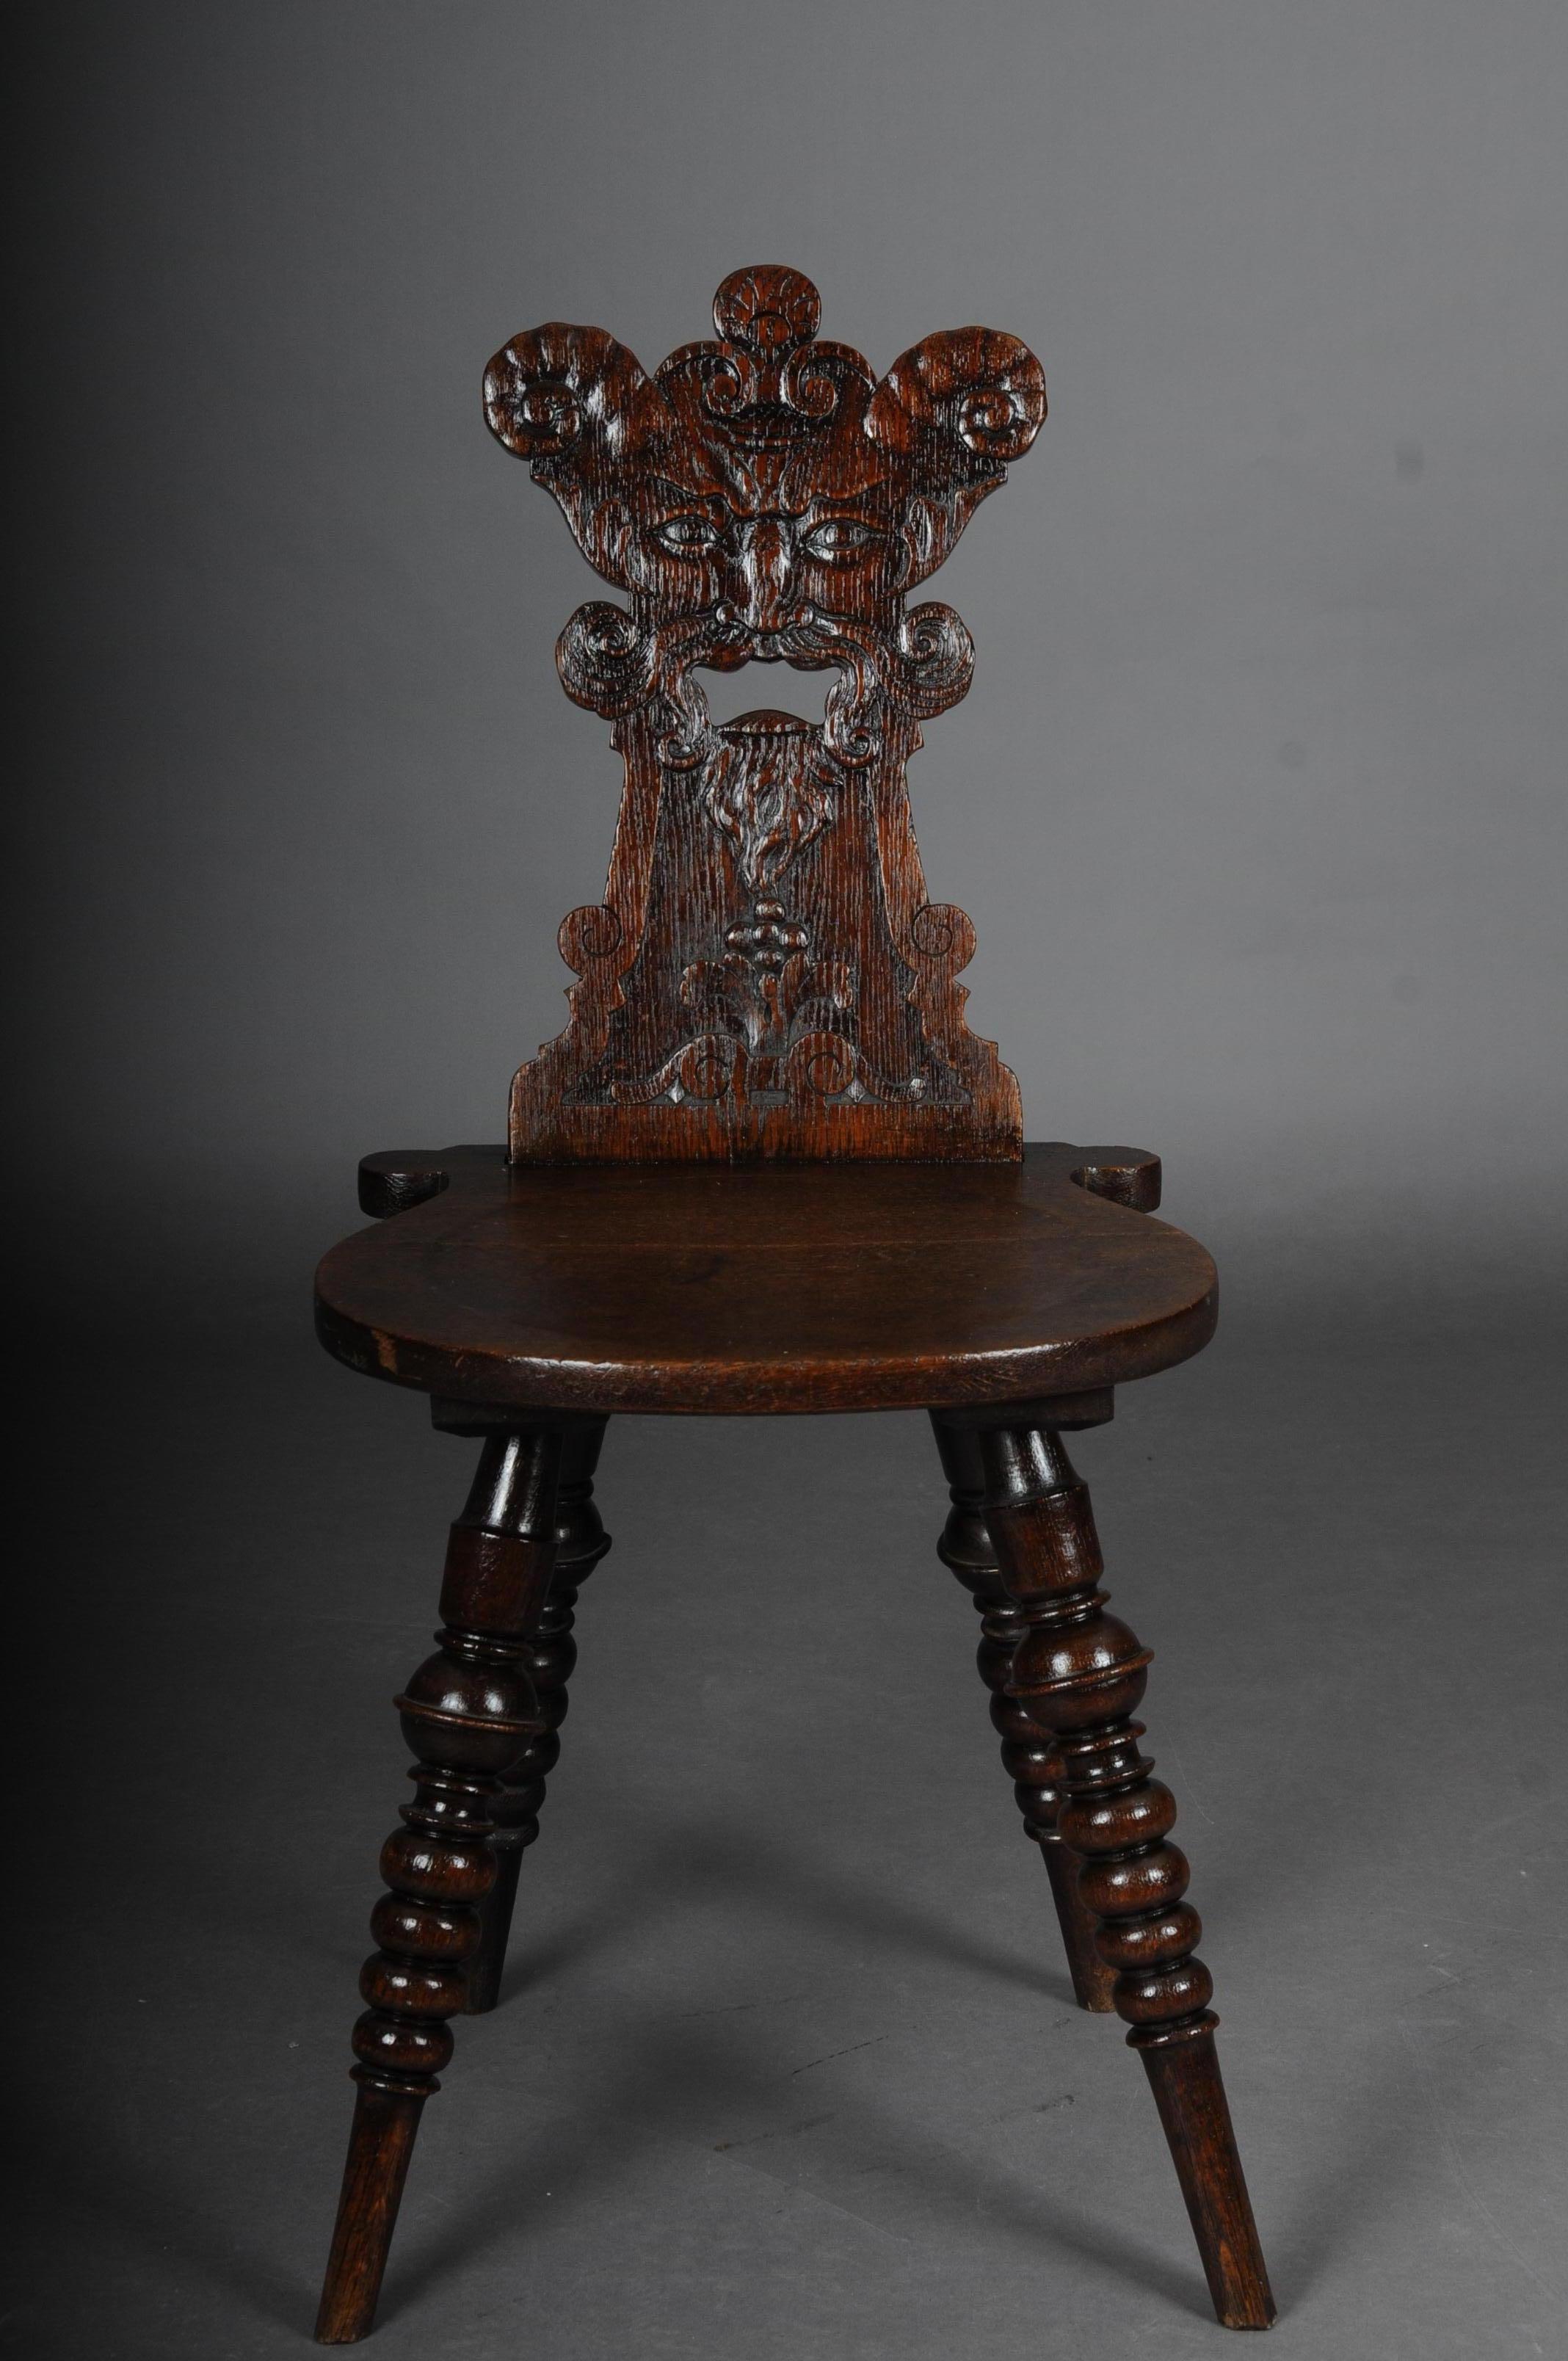 Antique neo Renaissance board chair historicism circa 1870, oak C.

Solid dark oak. Straight seat on turned and tapered legs.
Backrest with plastic mascarons. Extremely decorative and rare historicism chairs with rich carving.

(C-156).